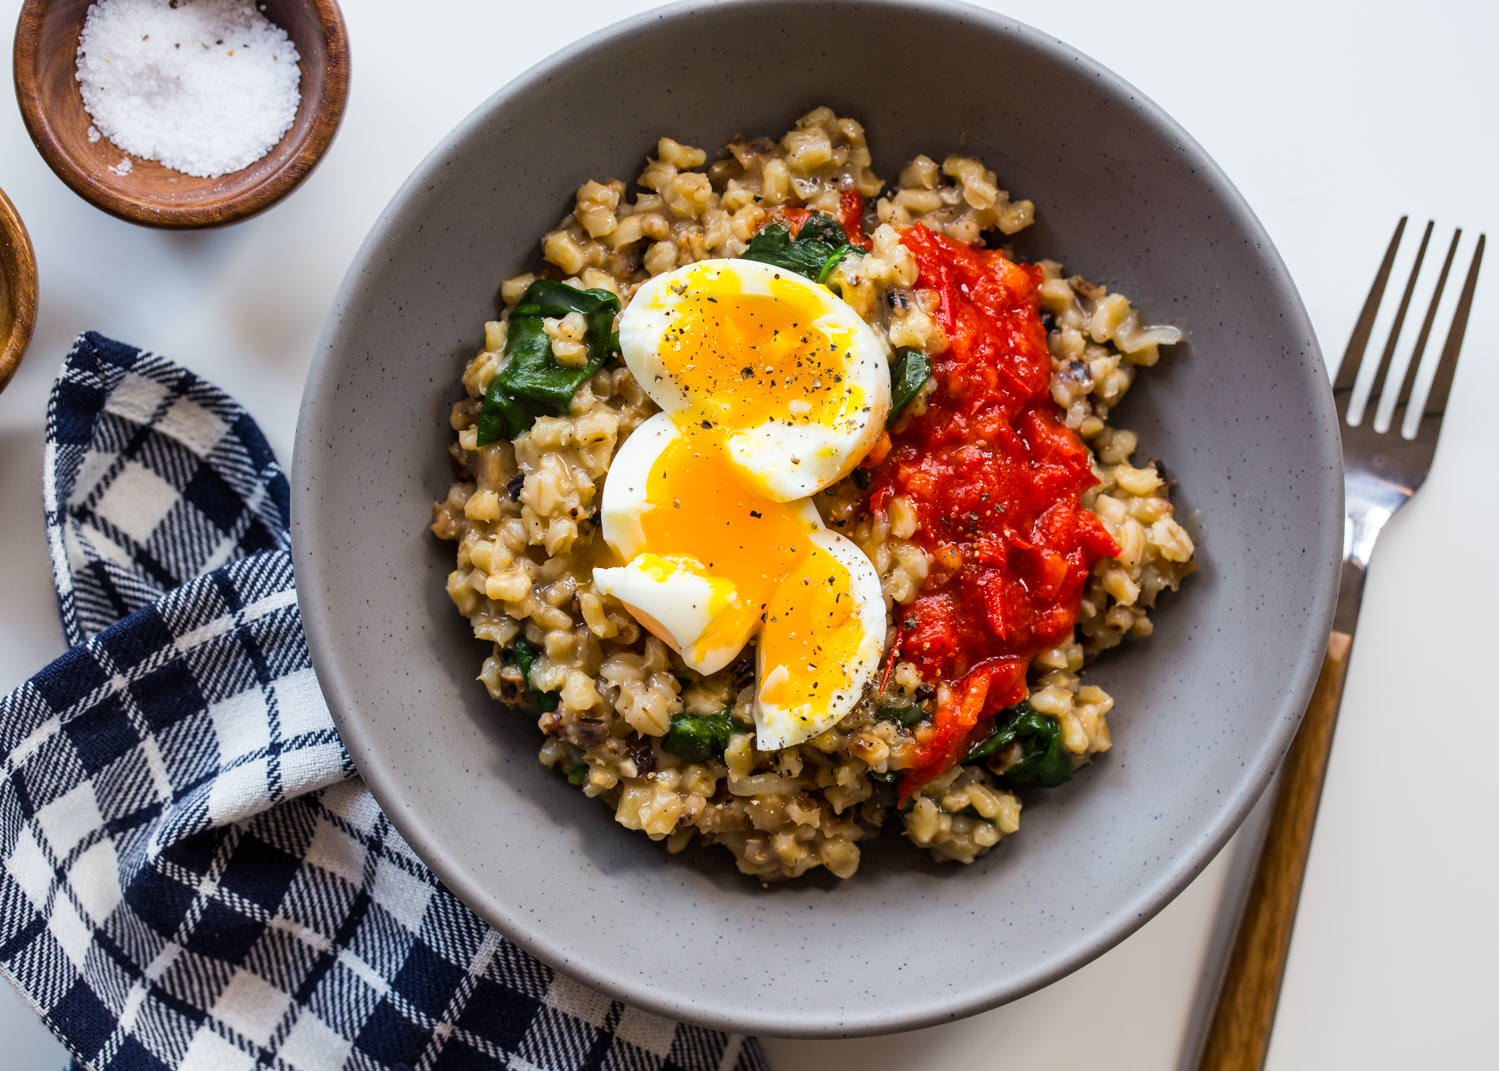 Barley Spinach Risotto made with Swanson® broth is full of flavor and will fit with any winter meal